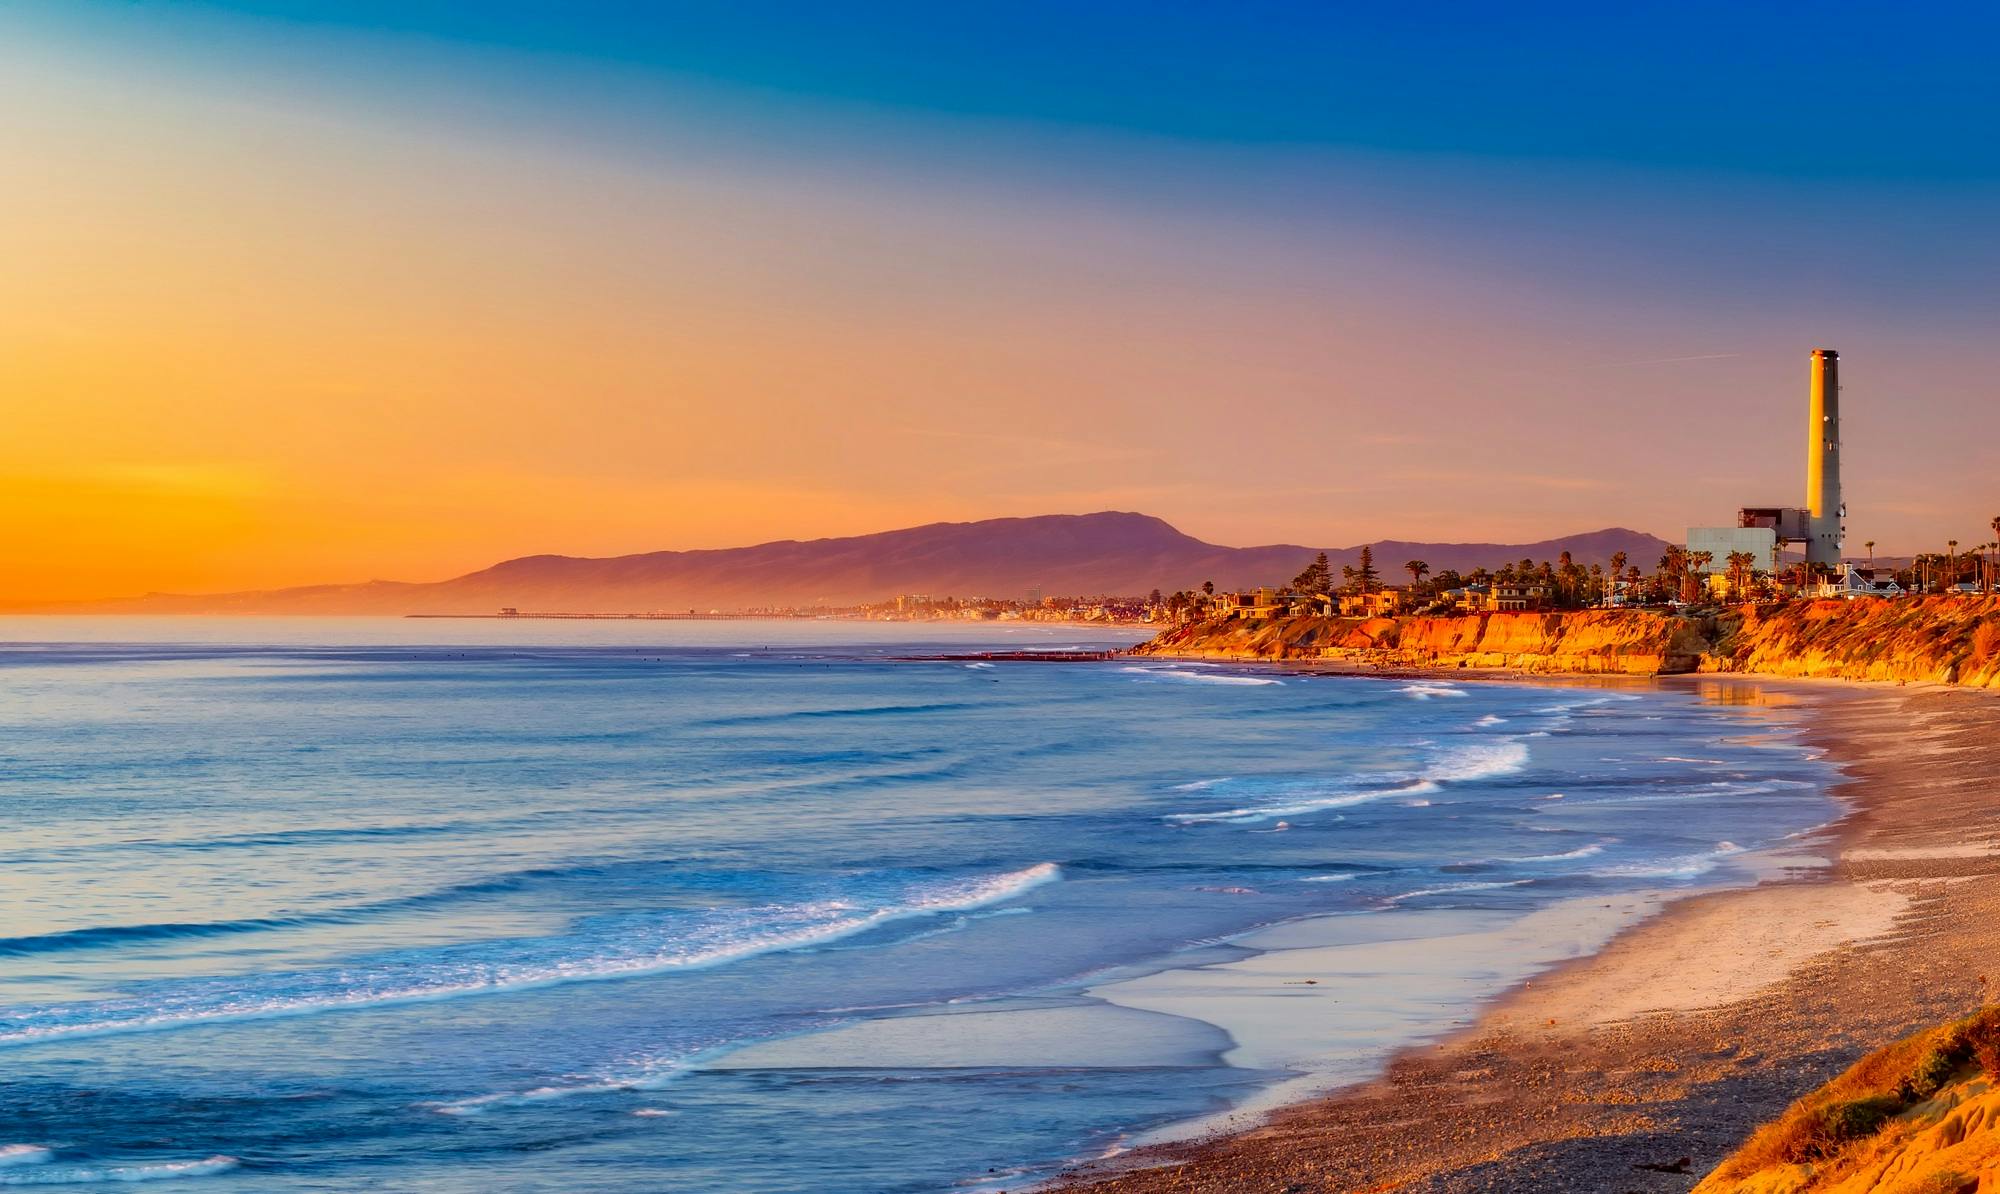 999 California Beach Pictures  Download Free Images on Unsplash